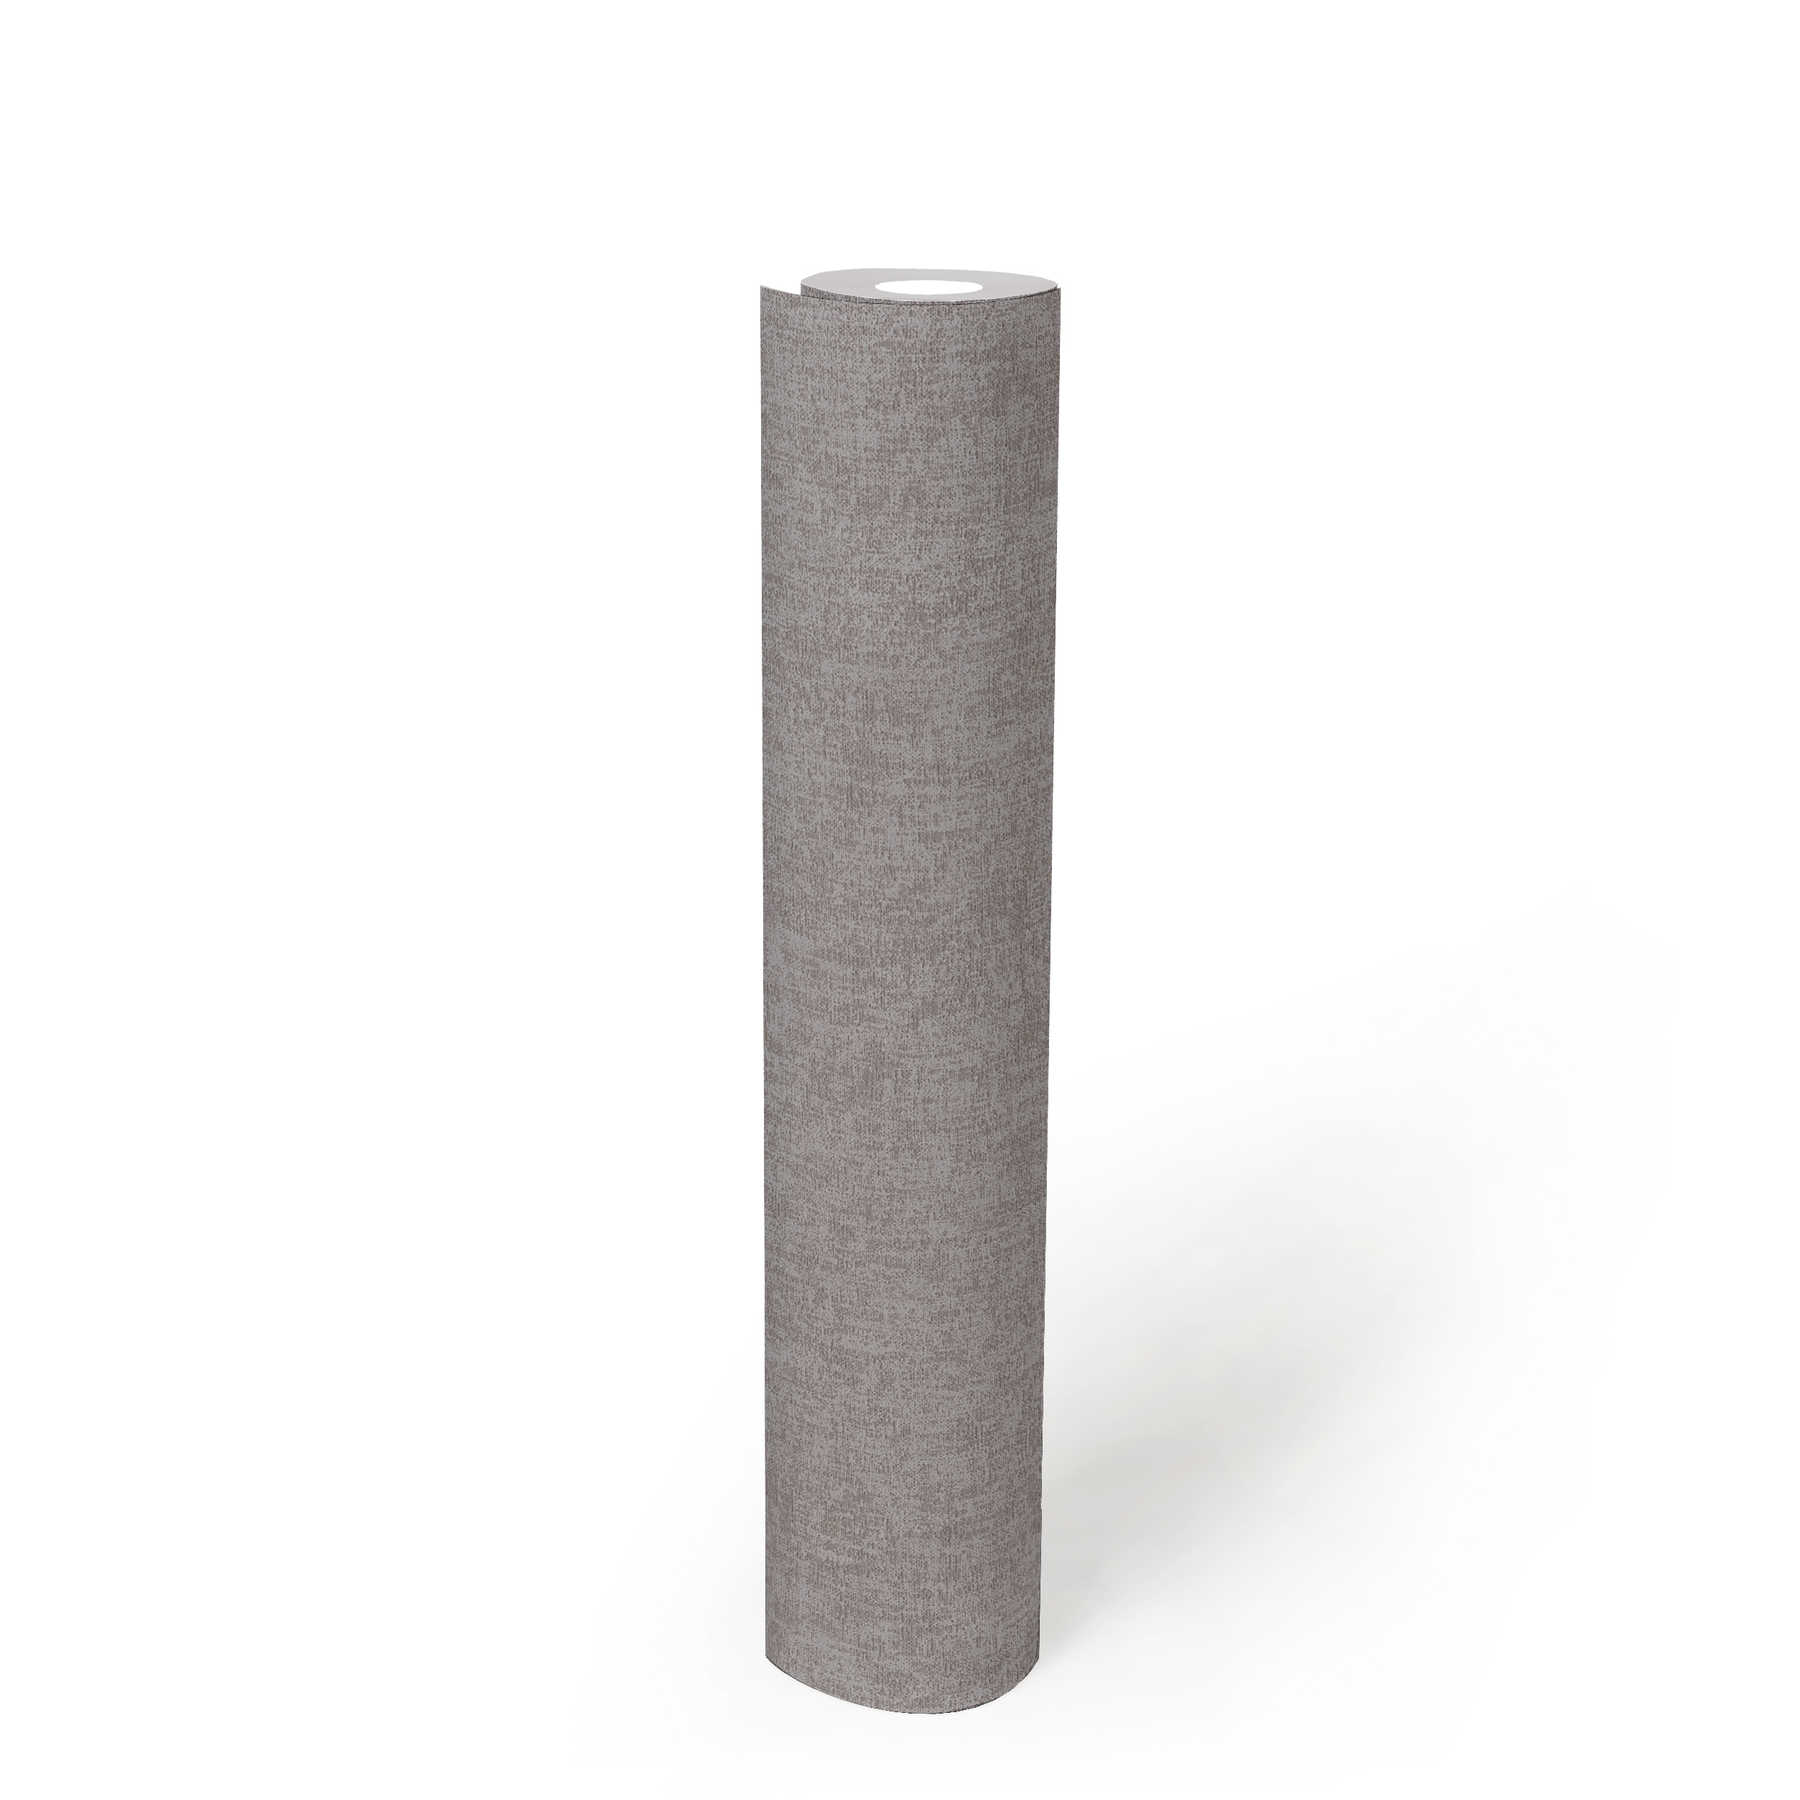             Plain wallpaper mottled with textile look - grey, brown
        